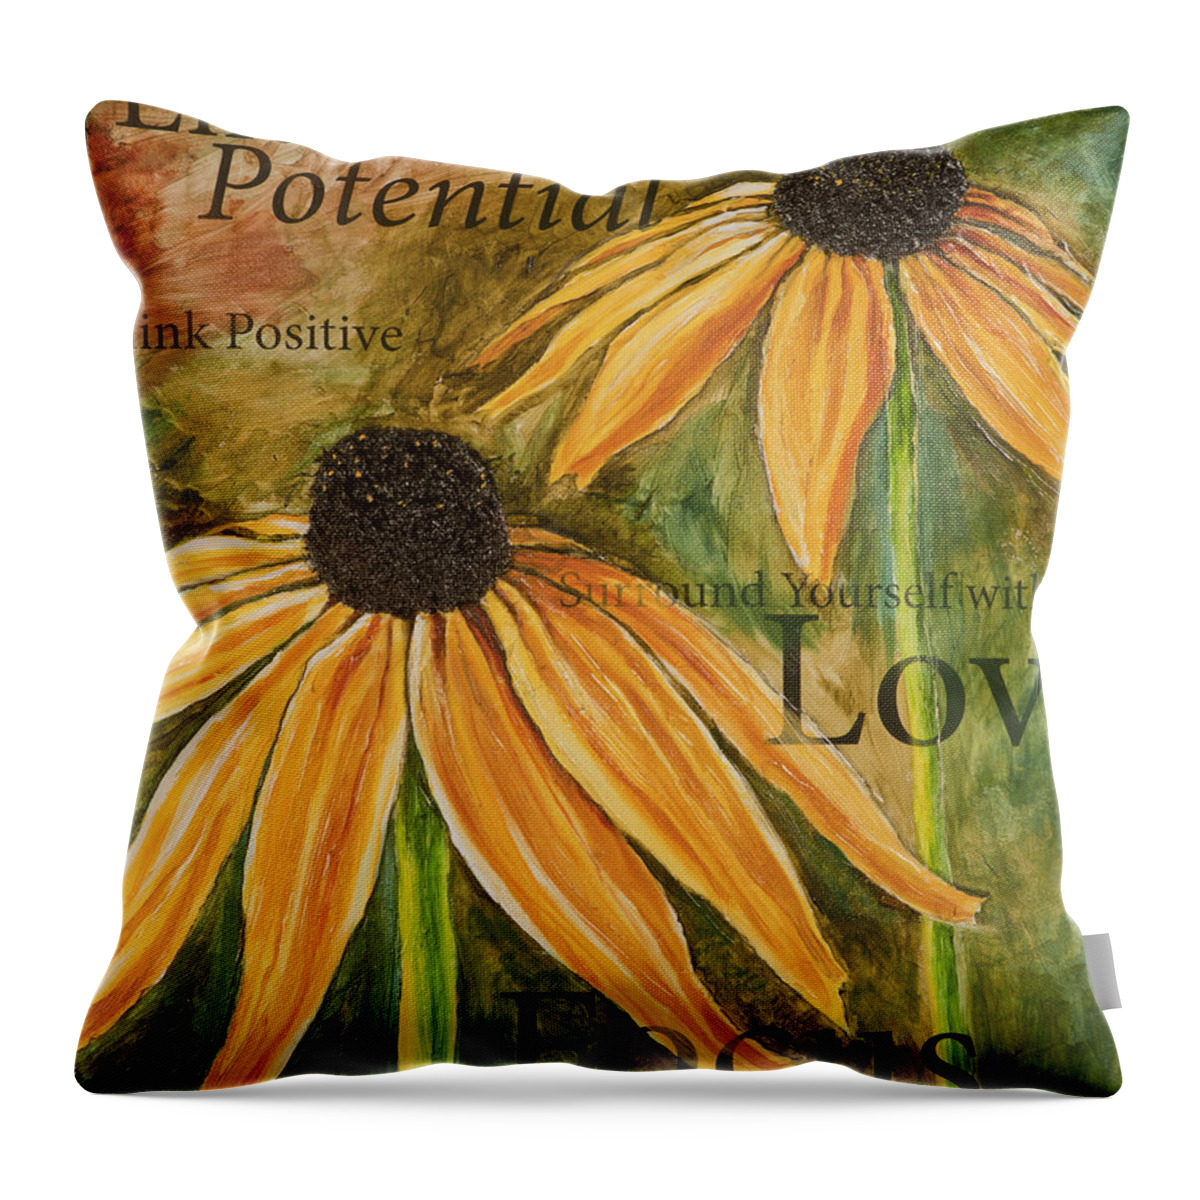 Endless Potential Throw Pillow featuring the painting Endless Potential by Lisa Jaworski